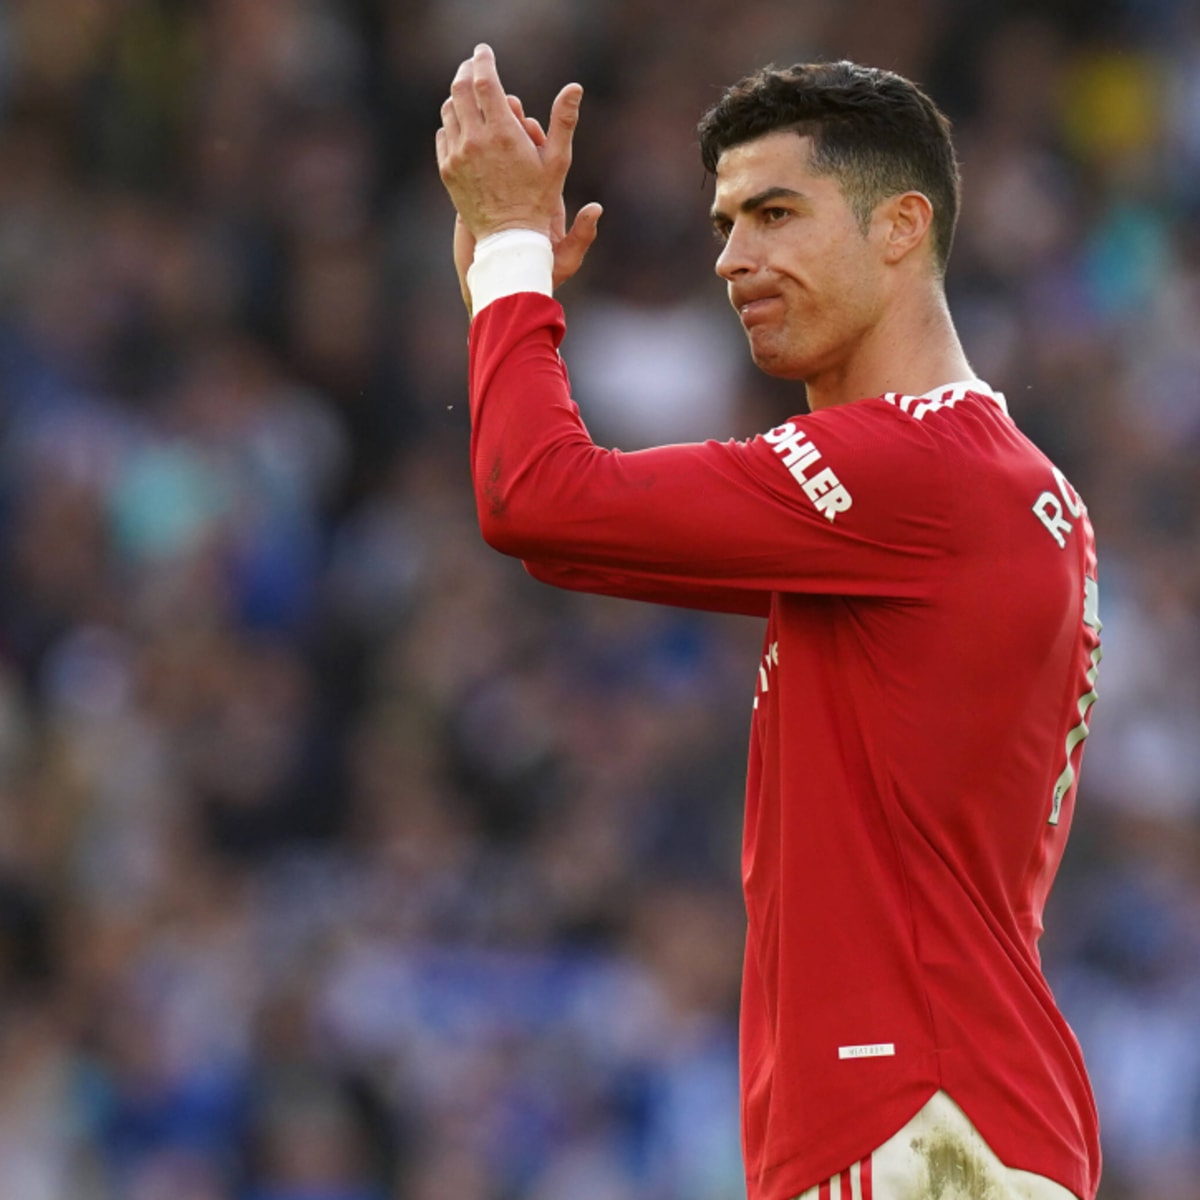 Cristiano Ronaldo Wants to Leave Manchester United, per Report - Sports Illustrated